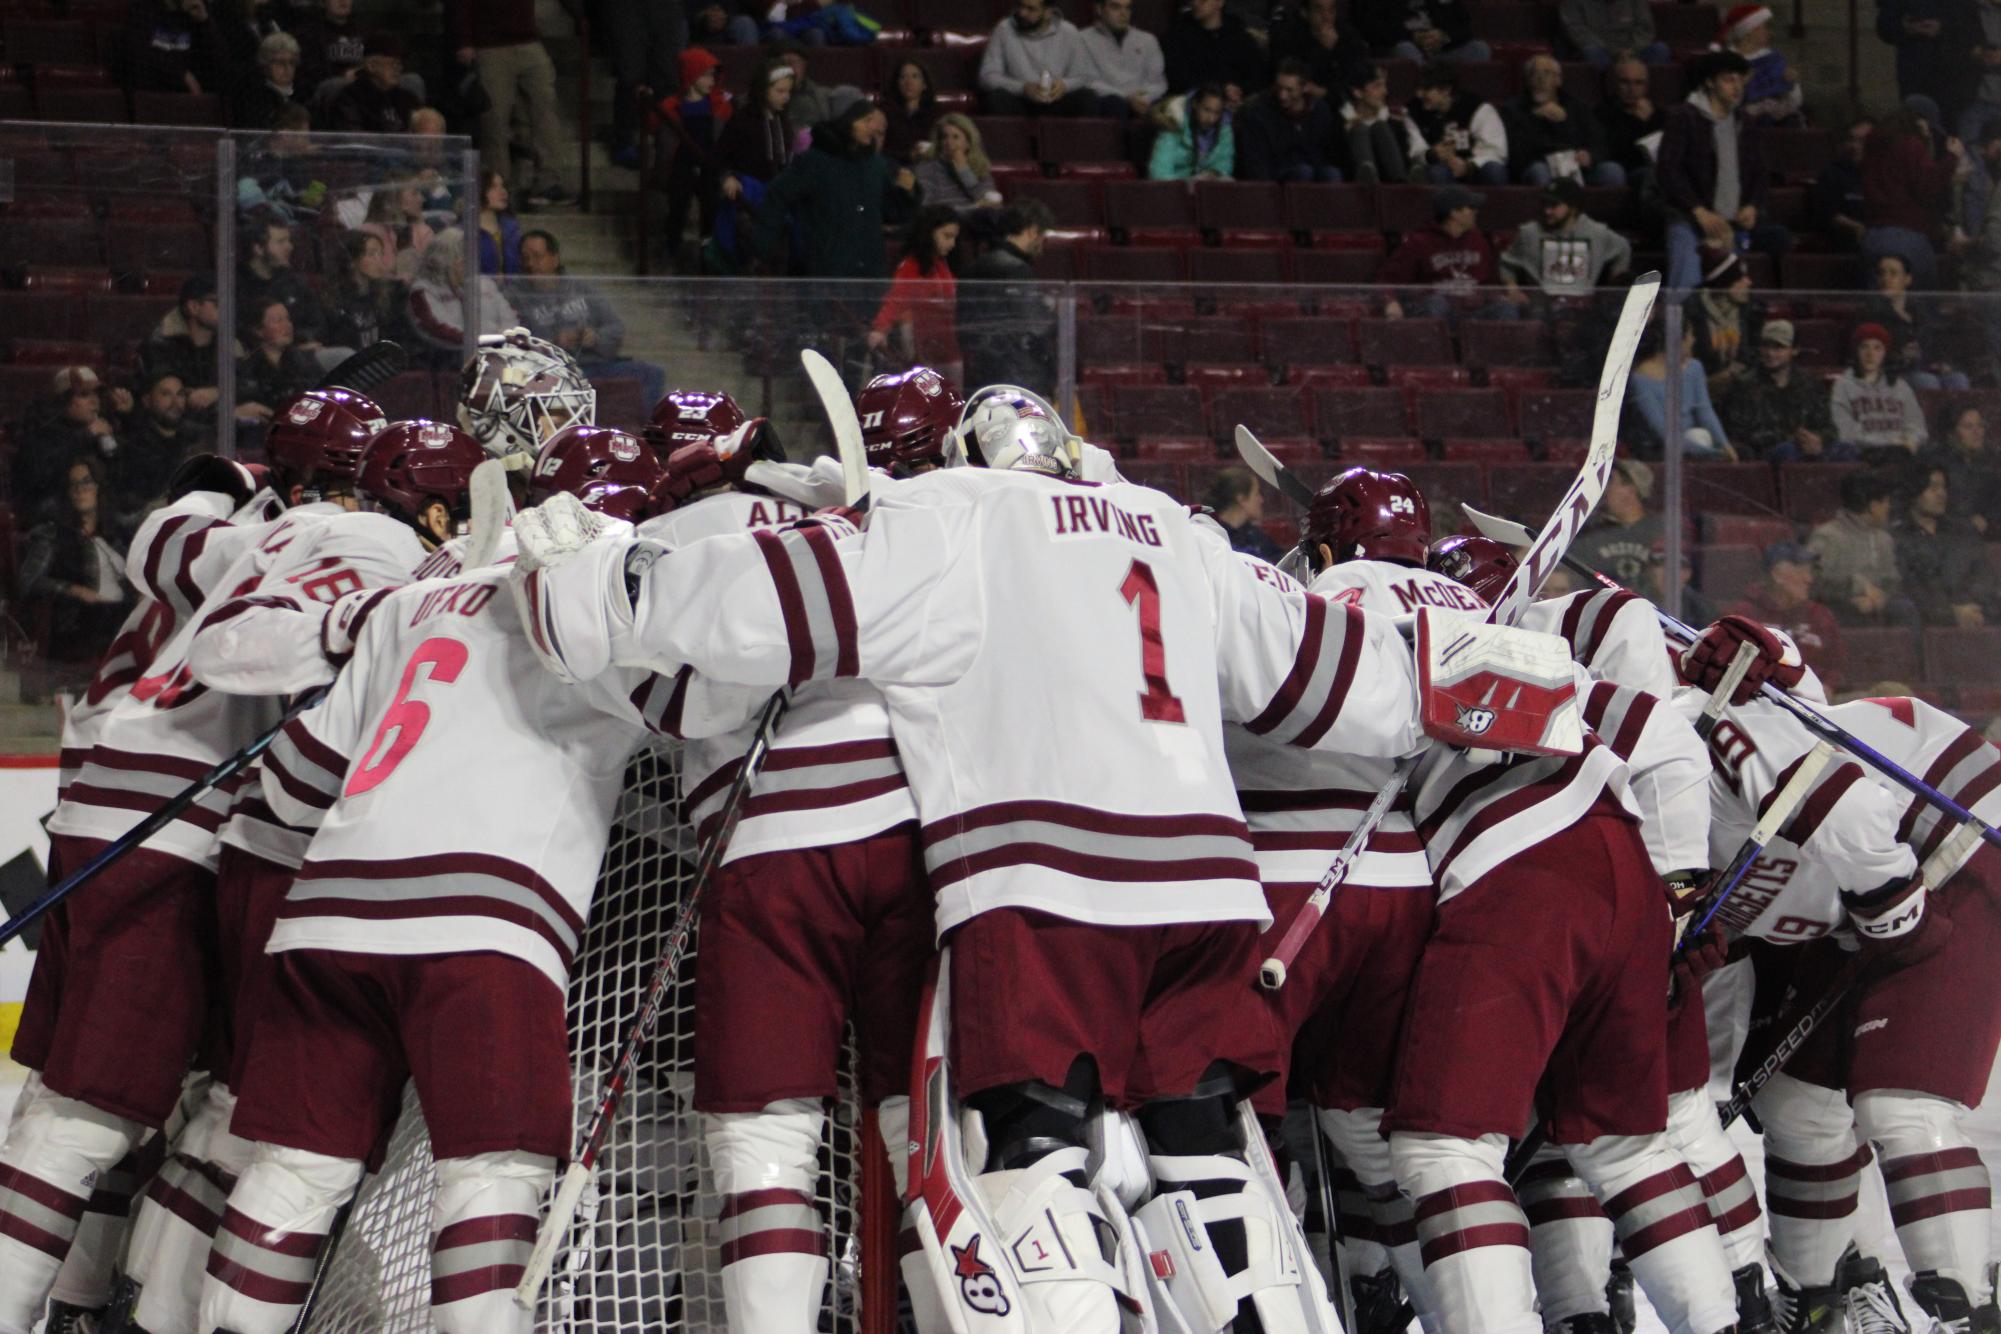 UMass set for big test with nation’s best Amherst Wire